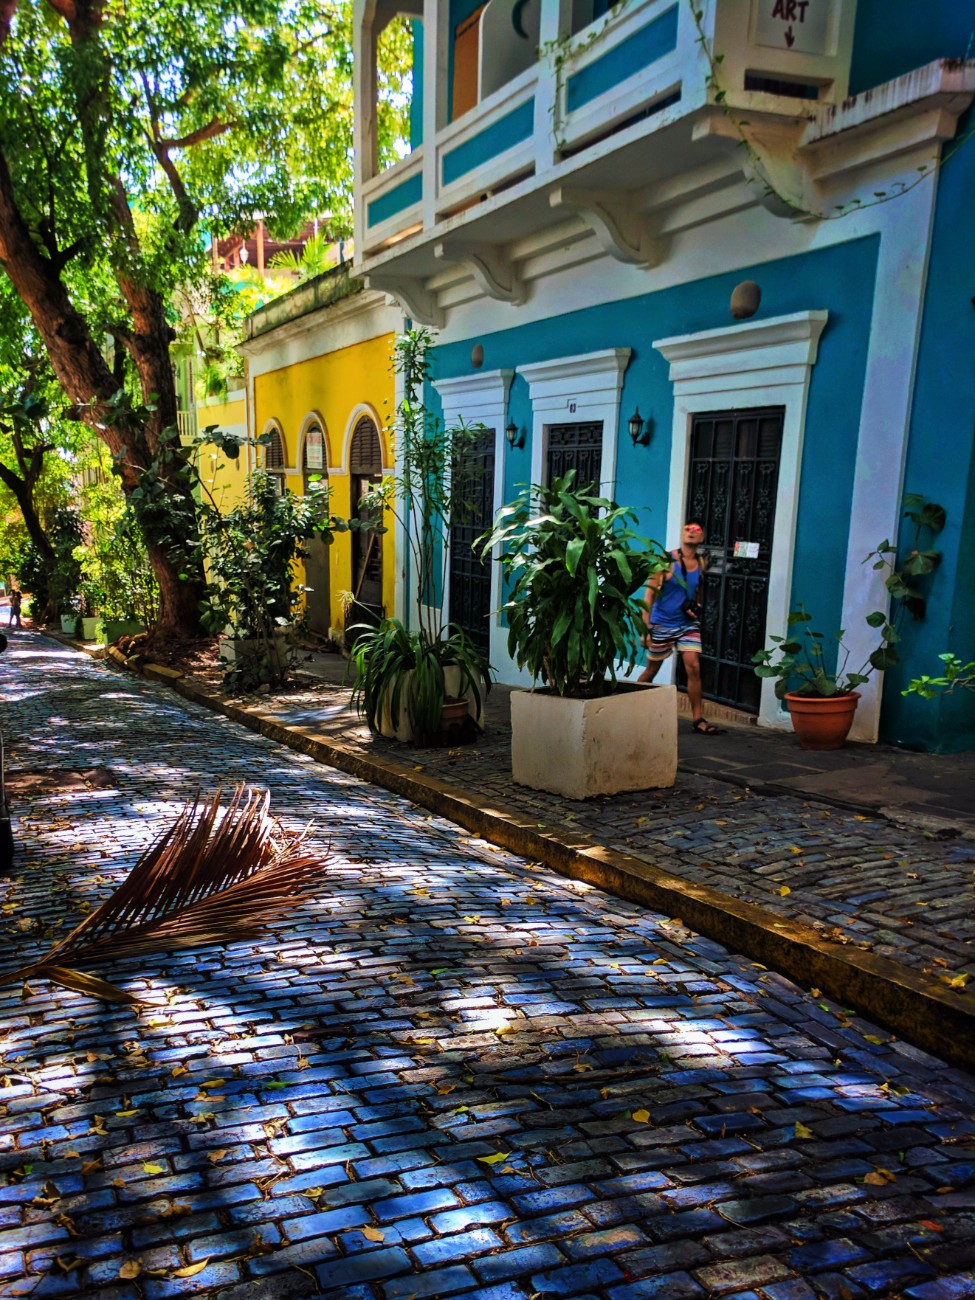 Rob Taylor with Colorful Buildings and cobblestone street in Old San Juan Puerto Rico 1